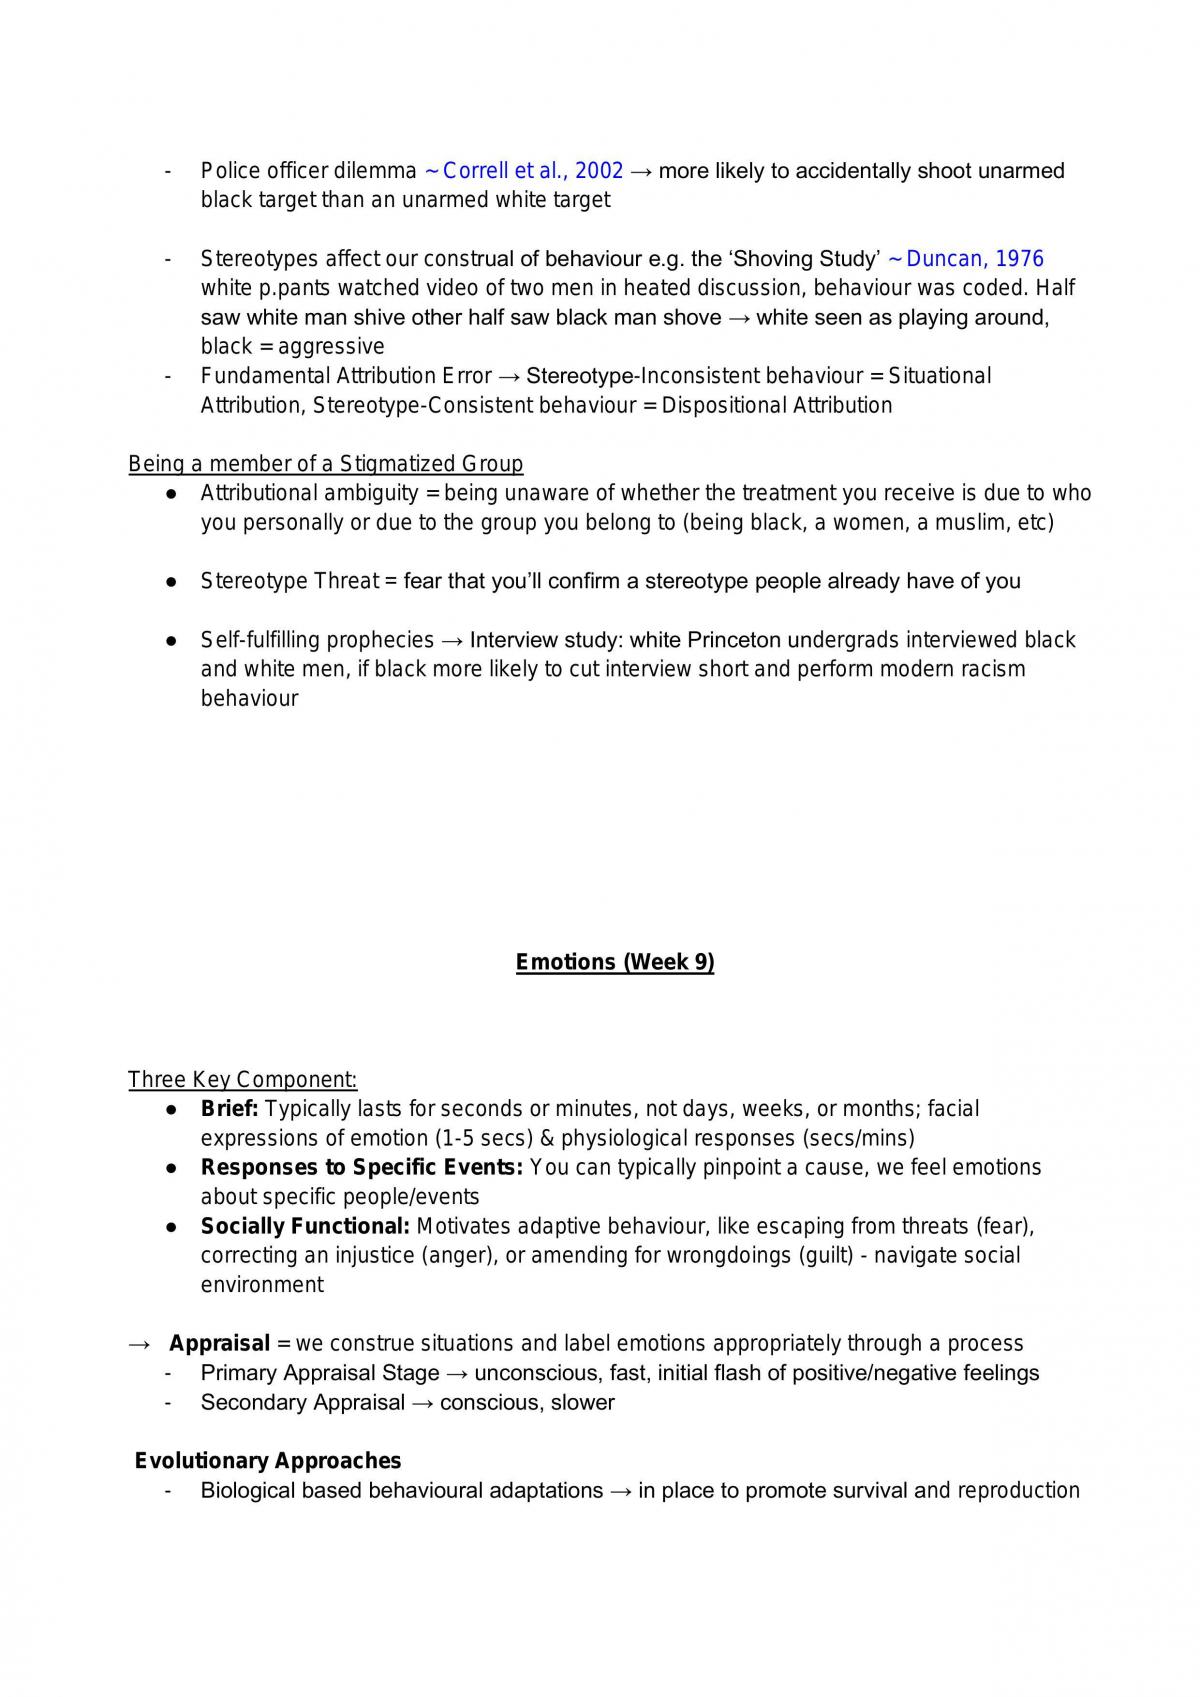 PS220 Social Psychology Revision Notes - Page 17